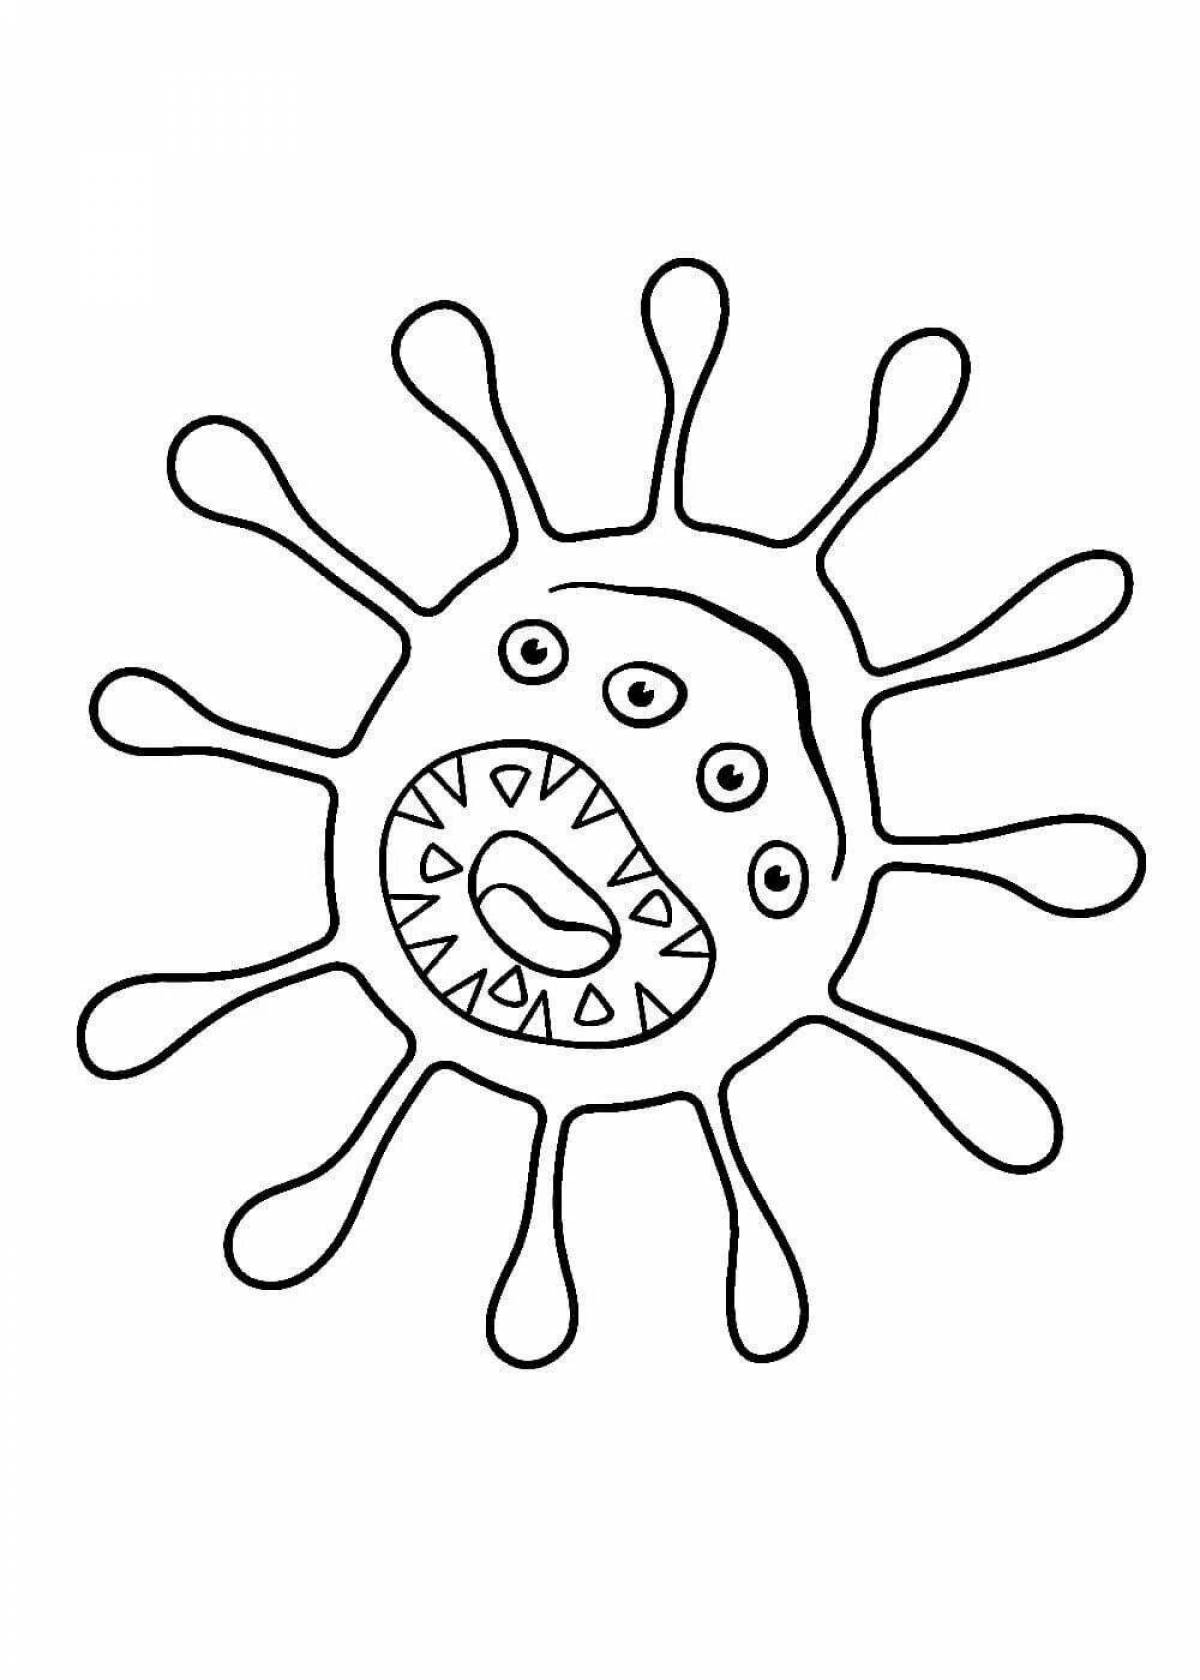 Colored microbes coloring pages for kids